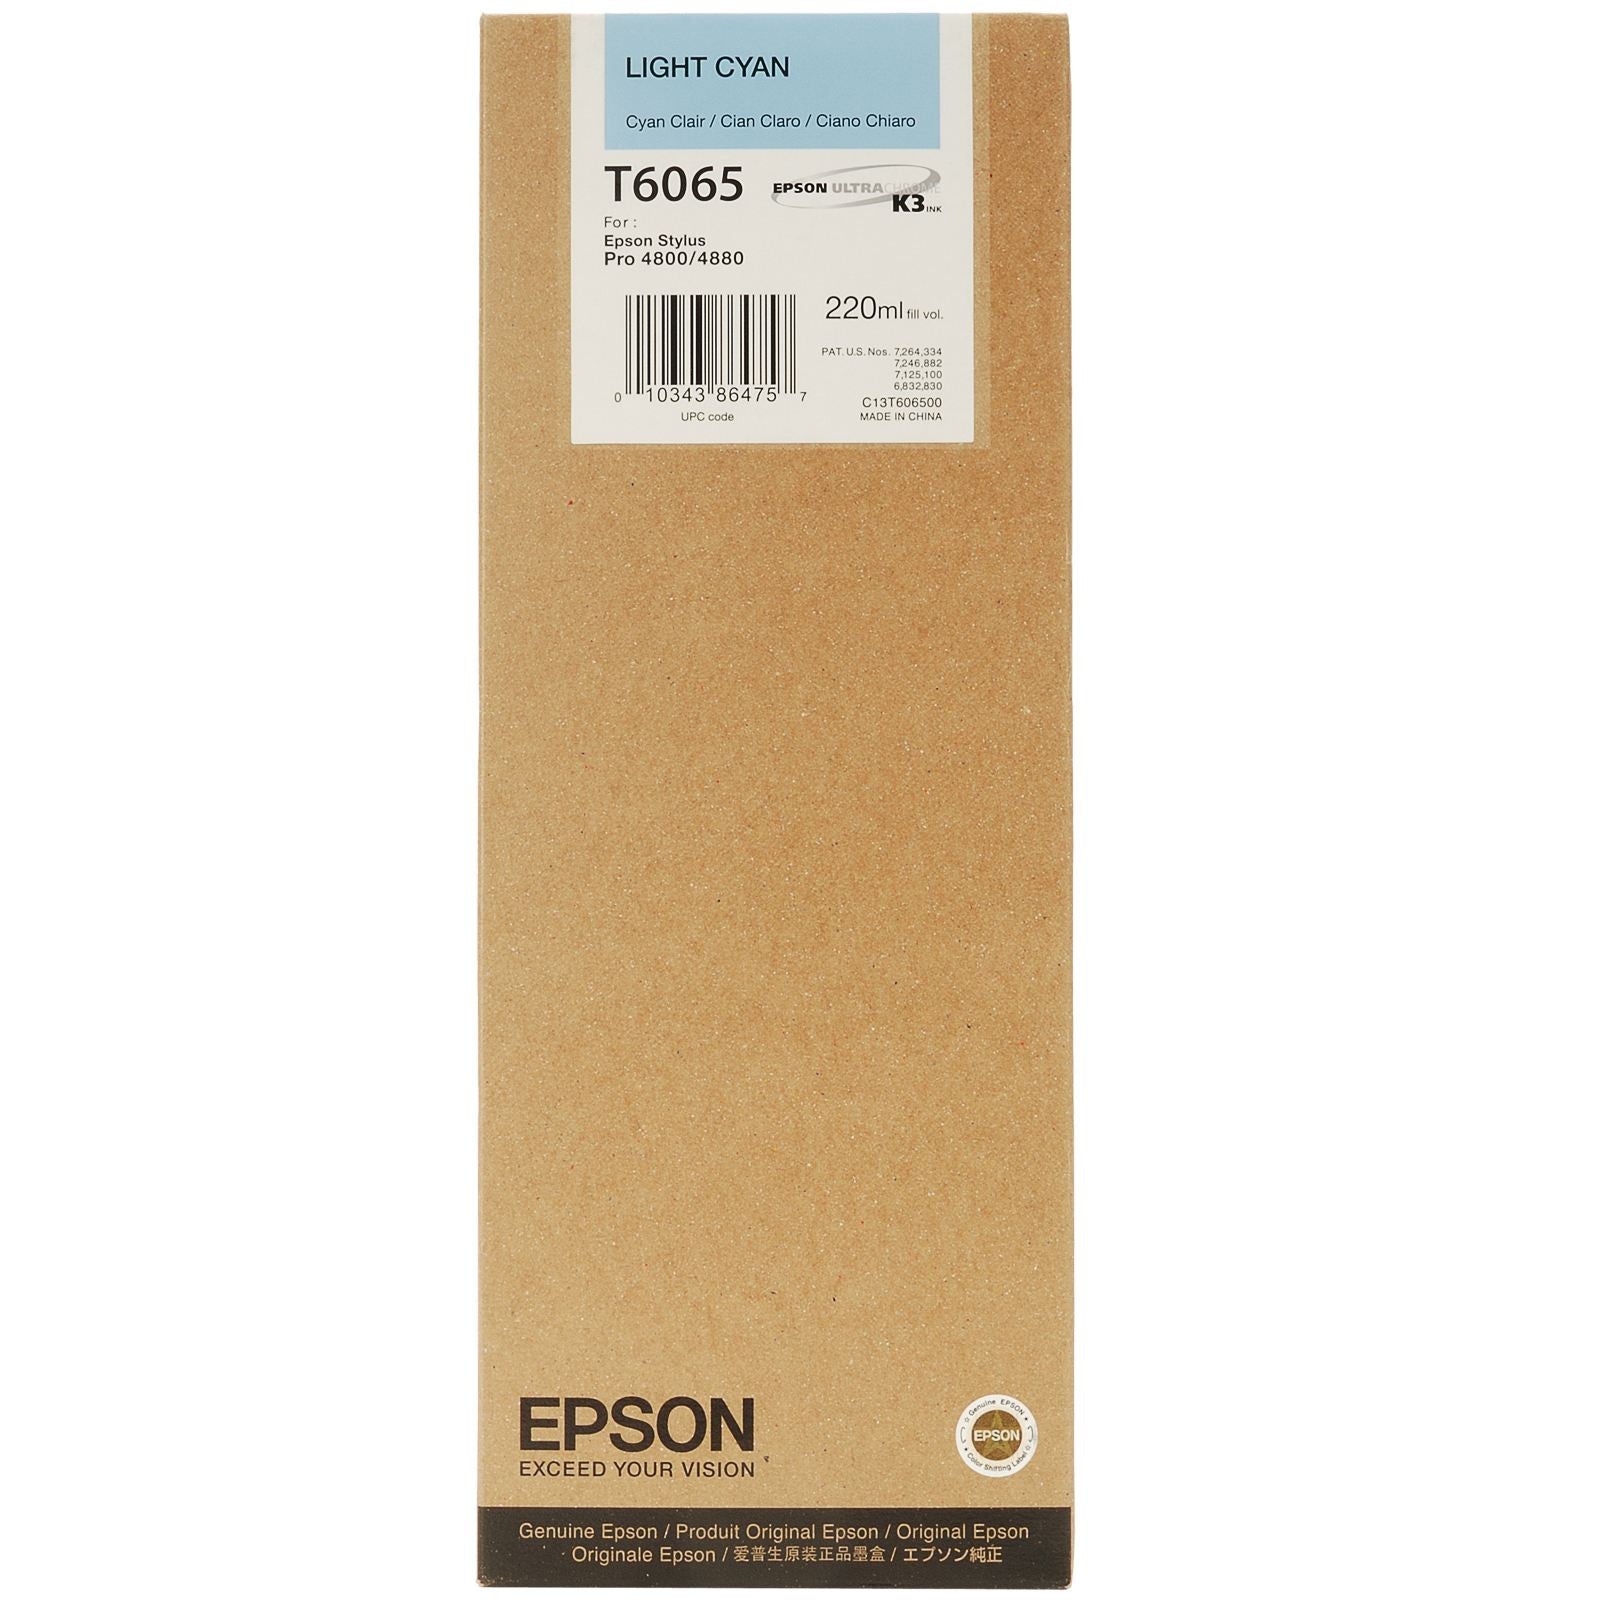 Epson T606500 4880/4800 Ultrachrome HDR Ink Light Cyan 220ml, papers ink large format, Epson - Pictureline 